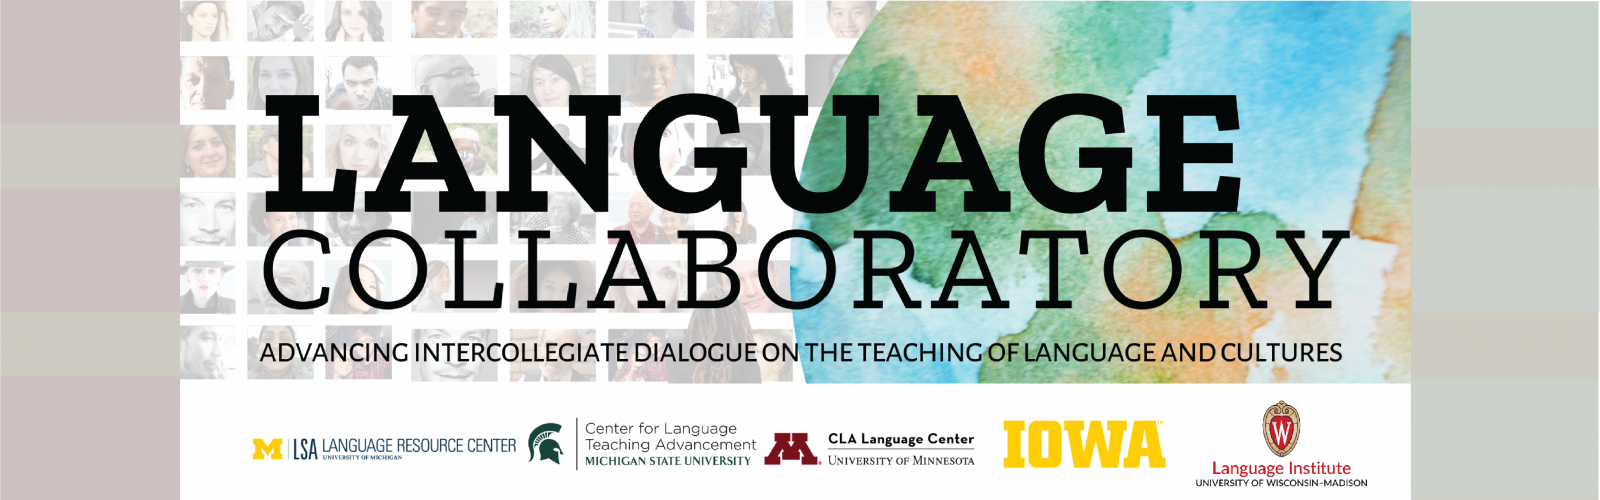 Language Collaboratory: Advancing Intercollegiate Dialogue on the Teaching of Language and Cultures